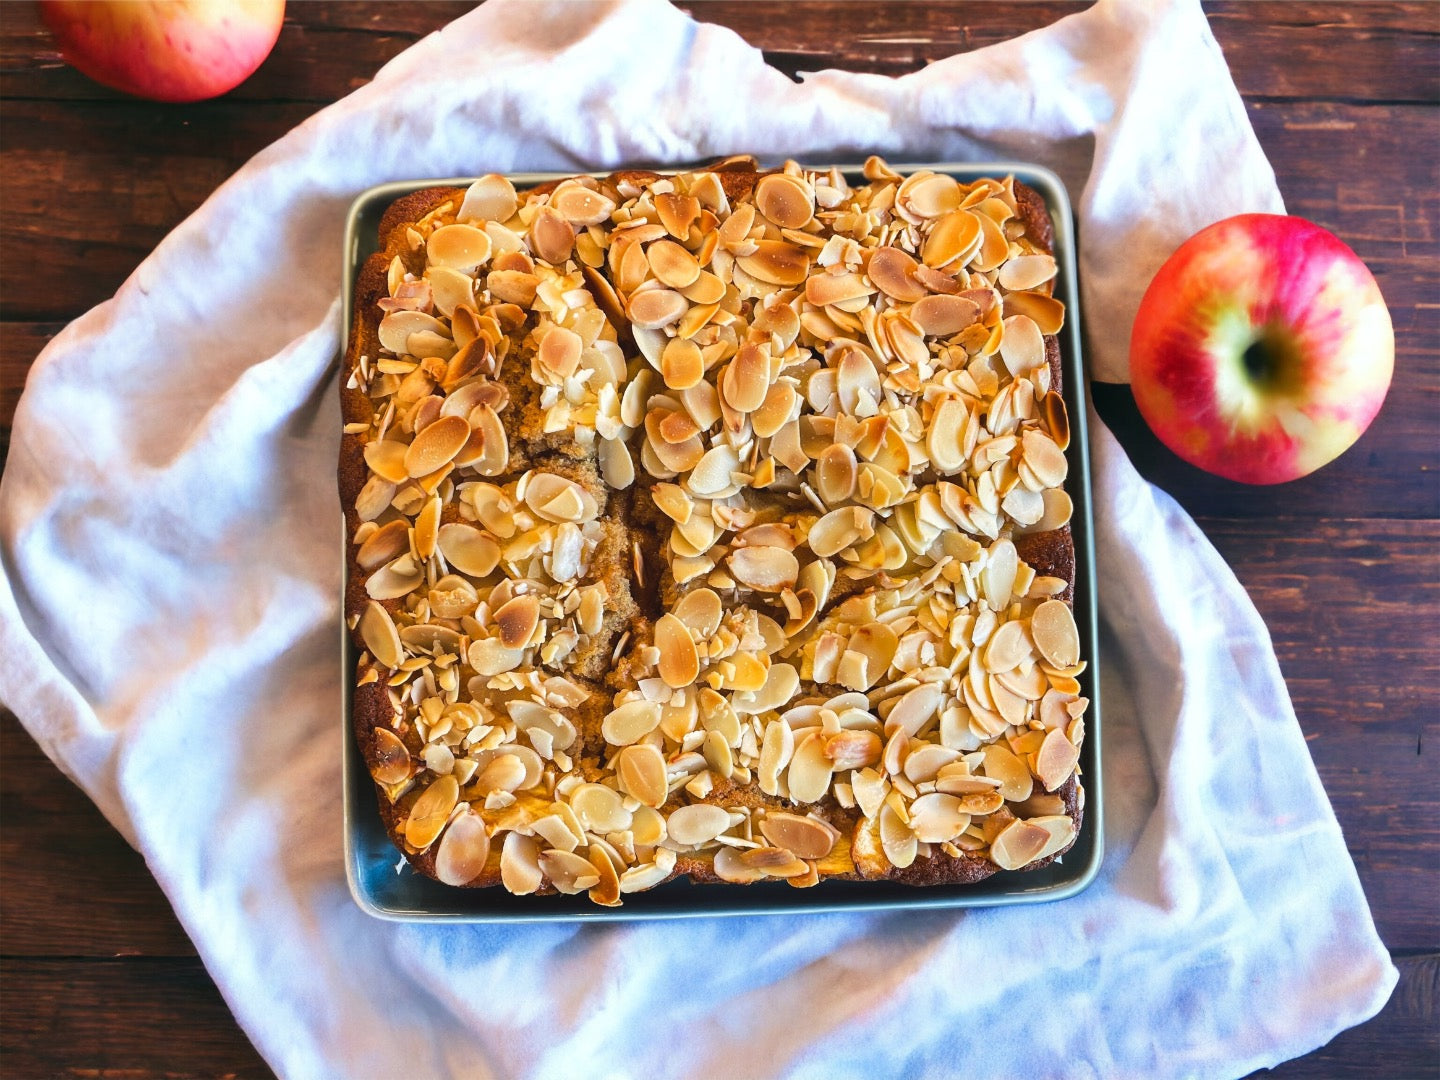 Prepare to be enchanted by the irresistible allure of our Apple Almond Cake!